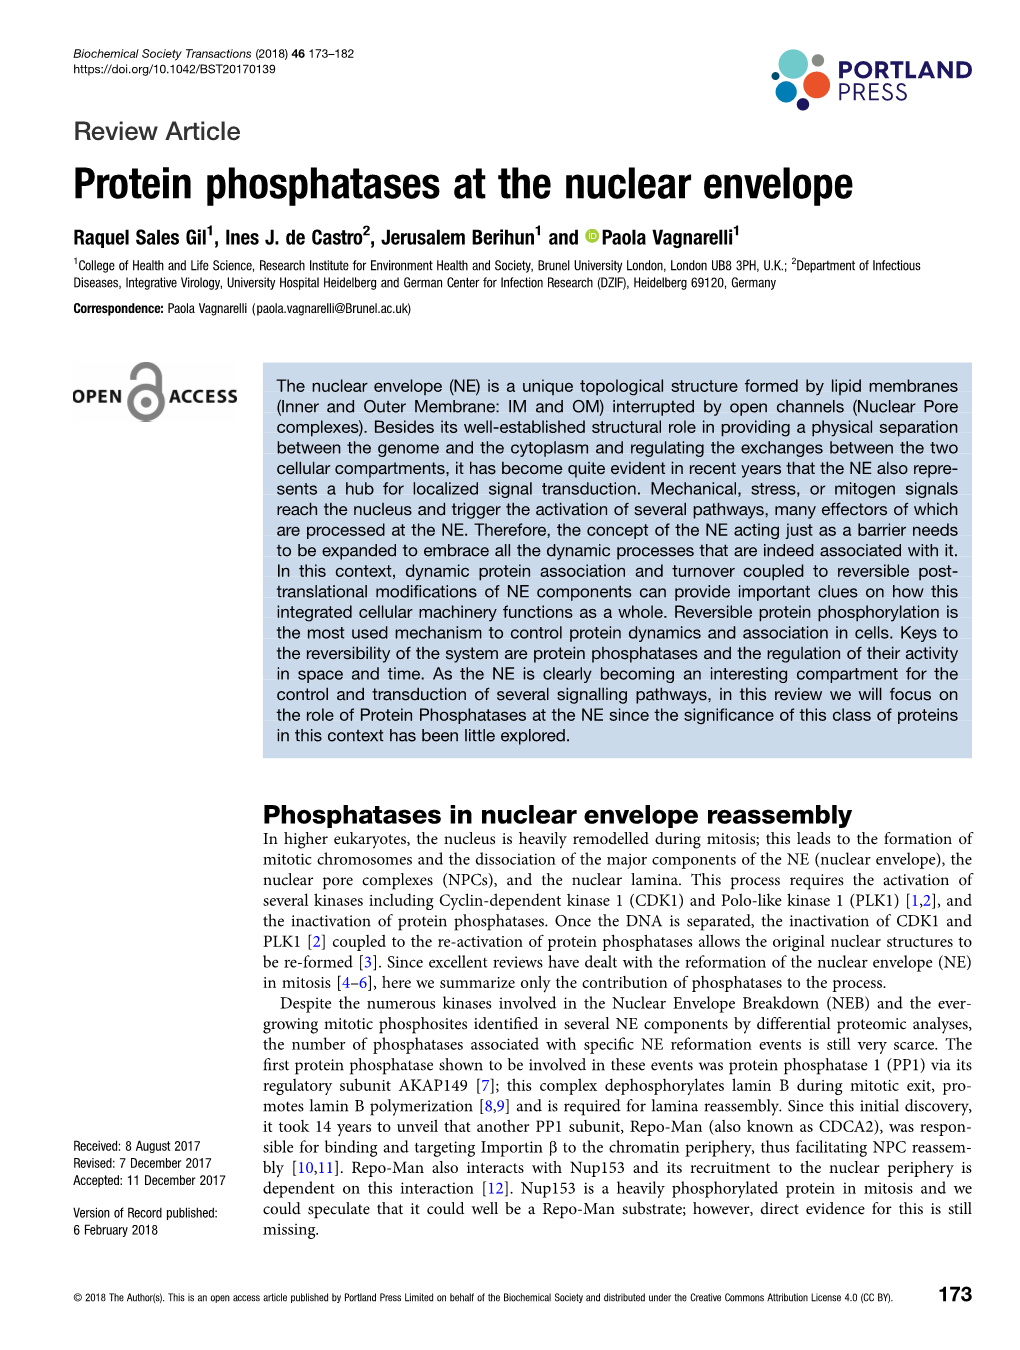 Protein Phosphatases at the Nuclear Envelope